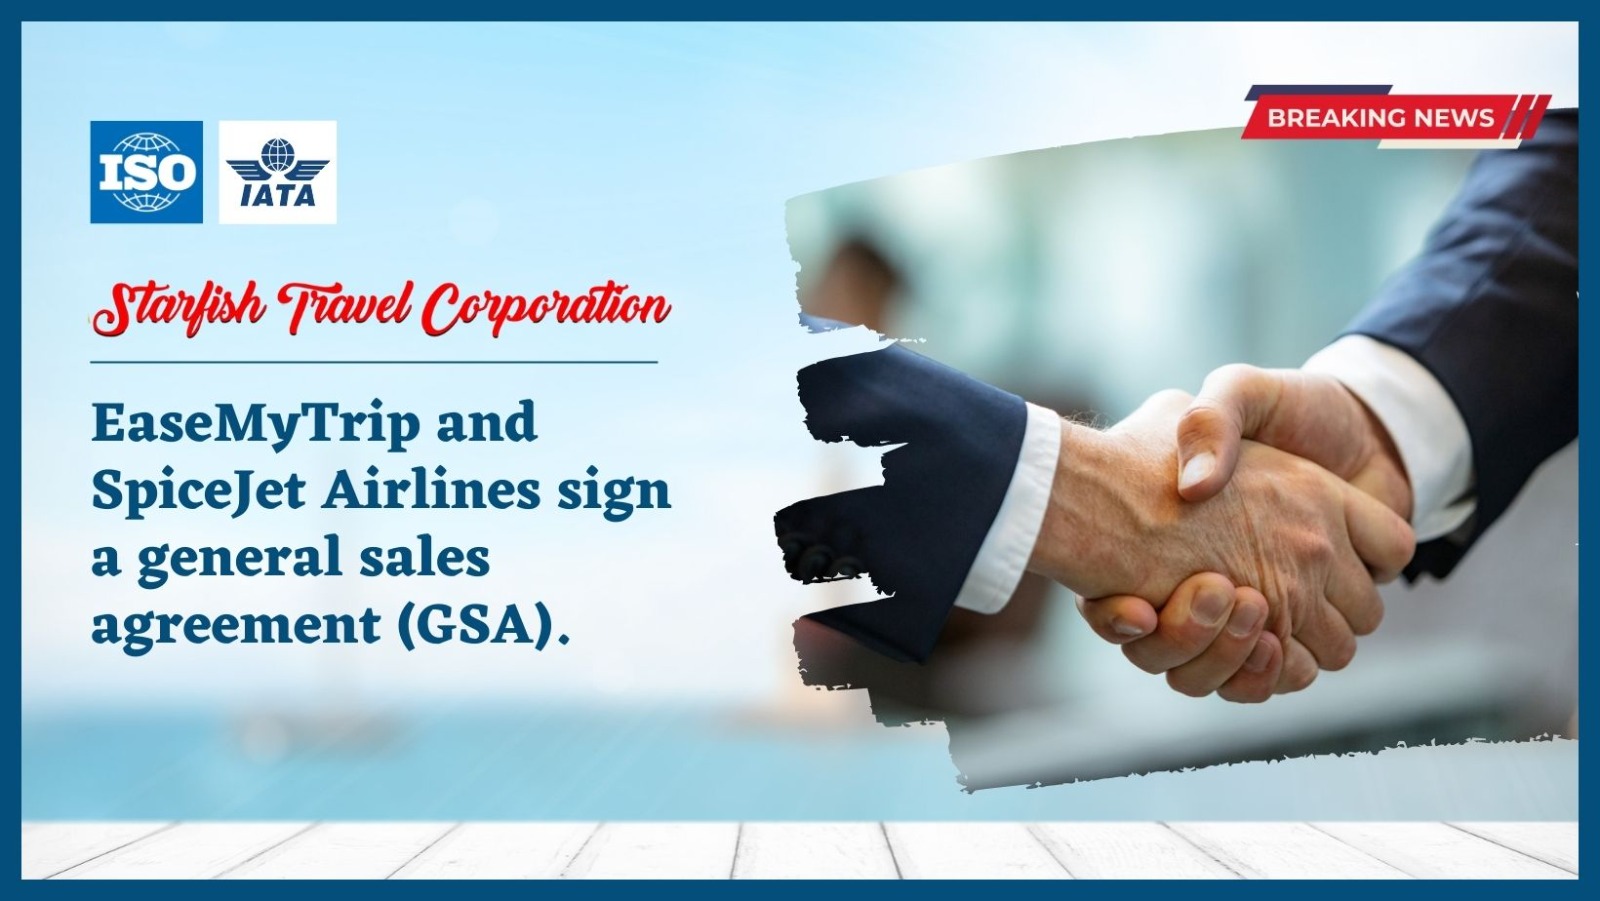 You are currently viewing EaseMyTrip and SpiceJet Airlines sign a general sales agreement (GSA).